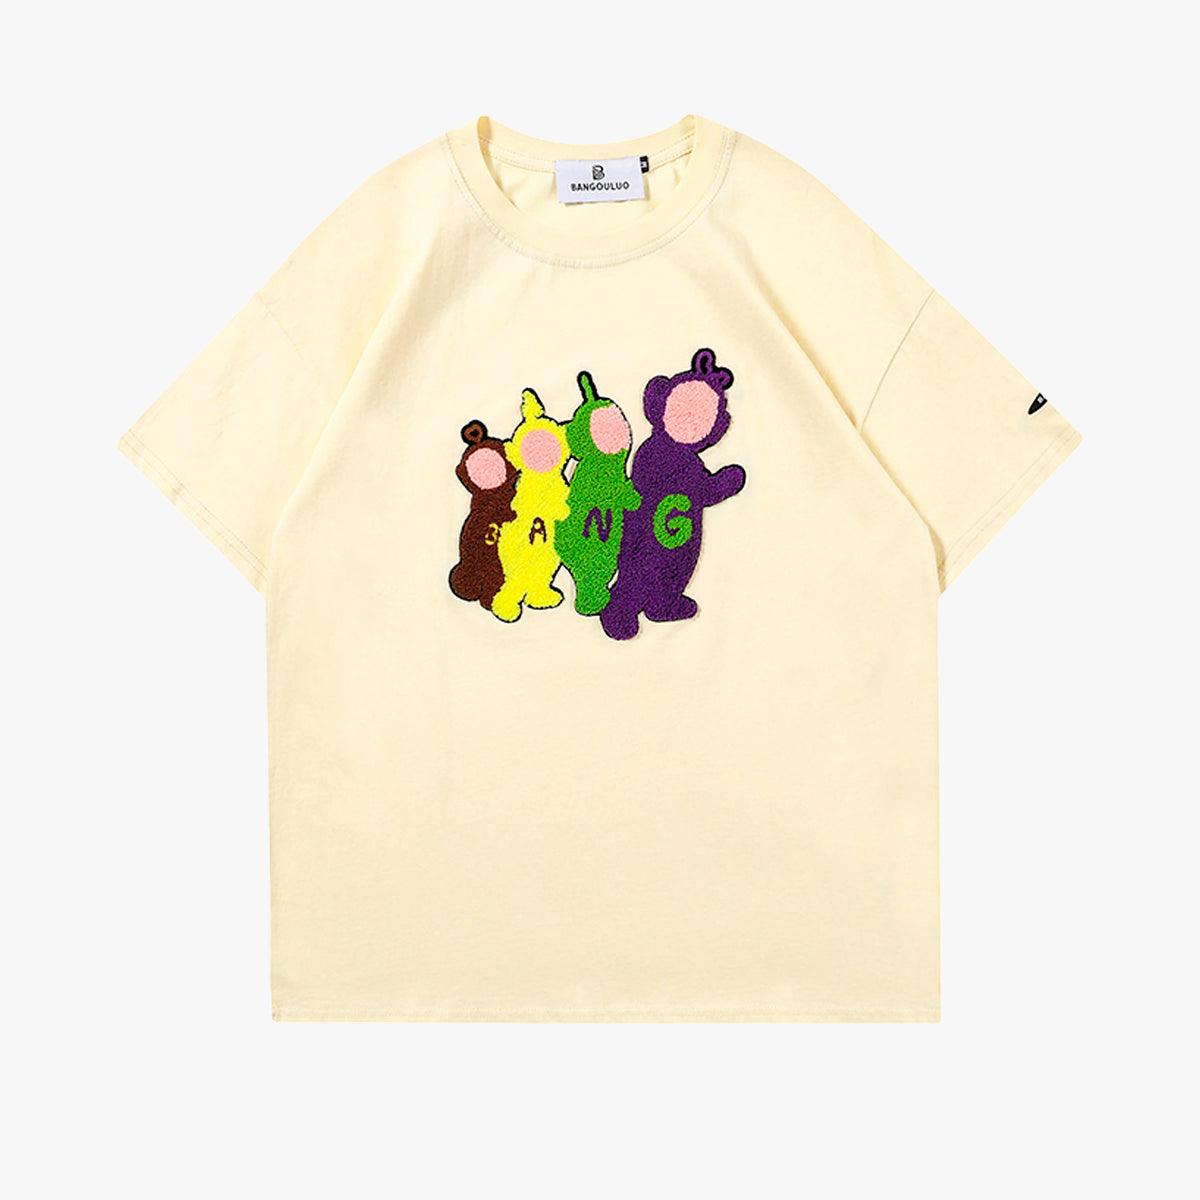 Plush Telebabies Gang Embroidery T-Shirt - Aesthetic Clothes Shop